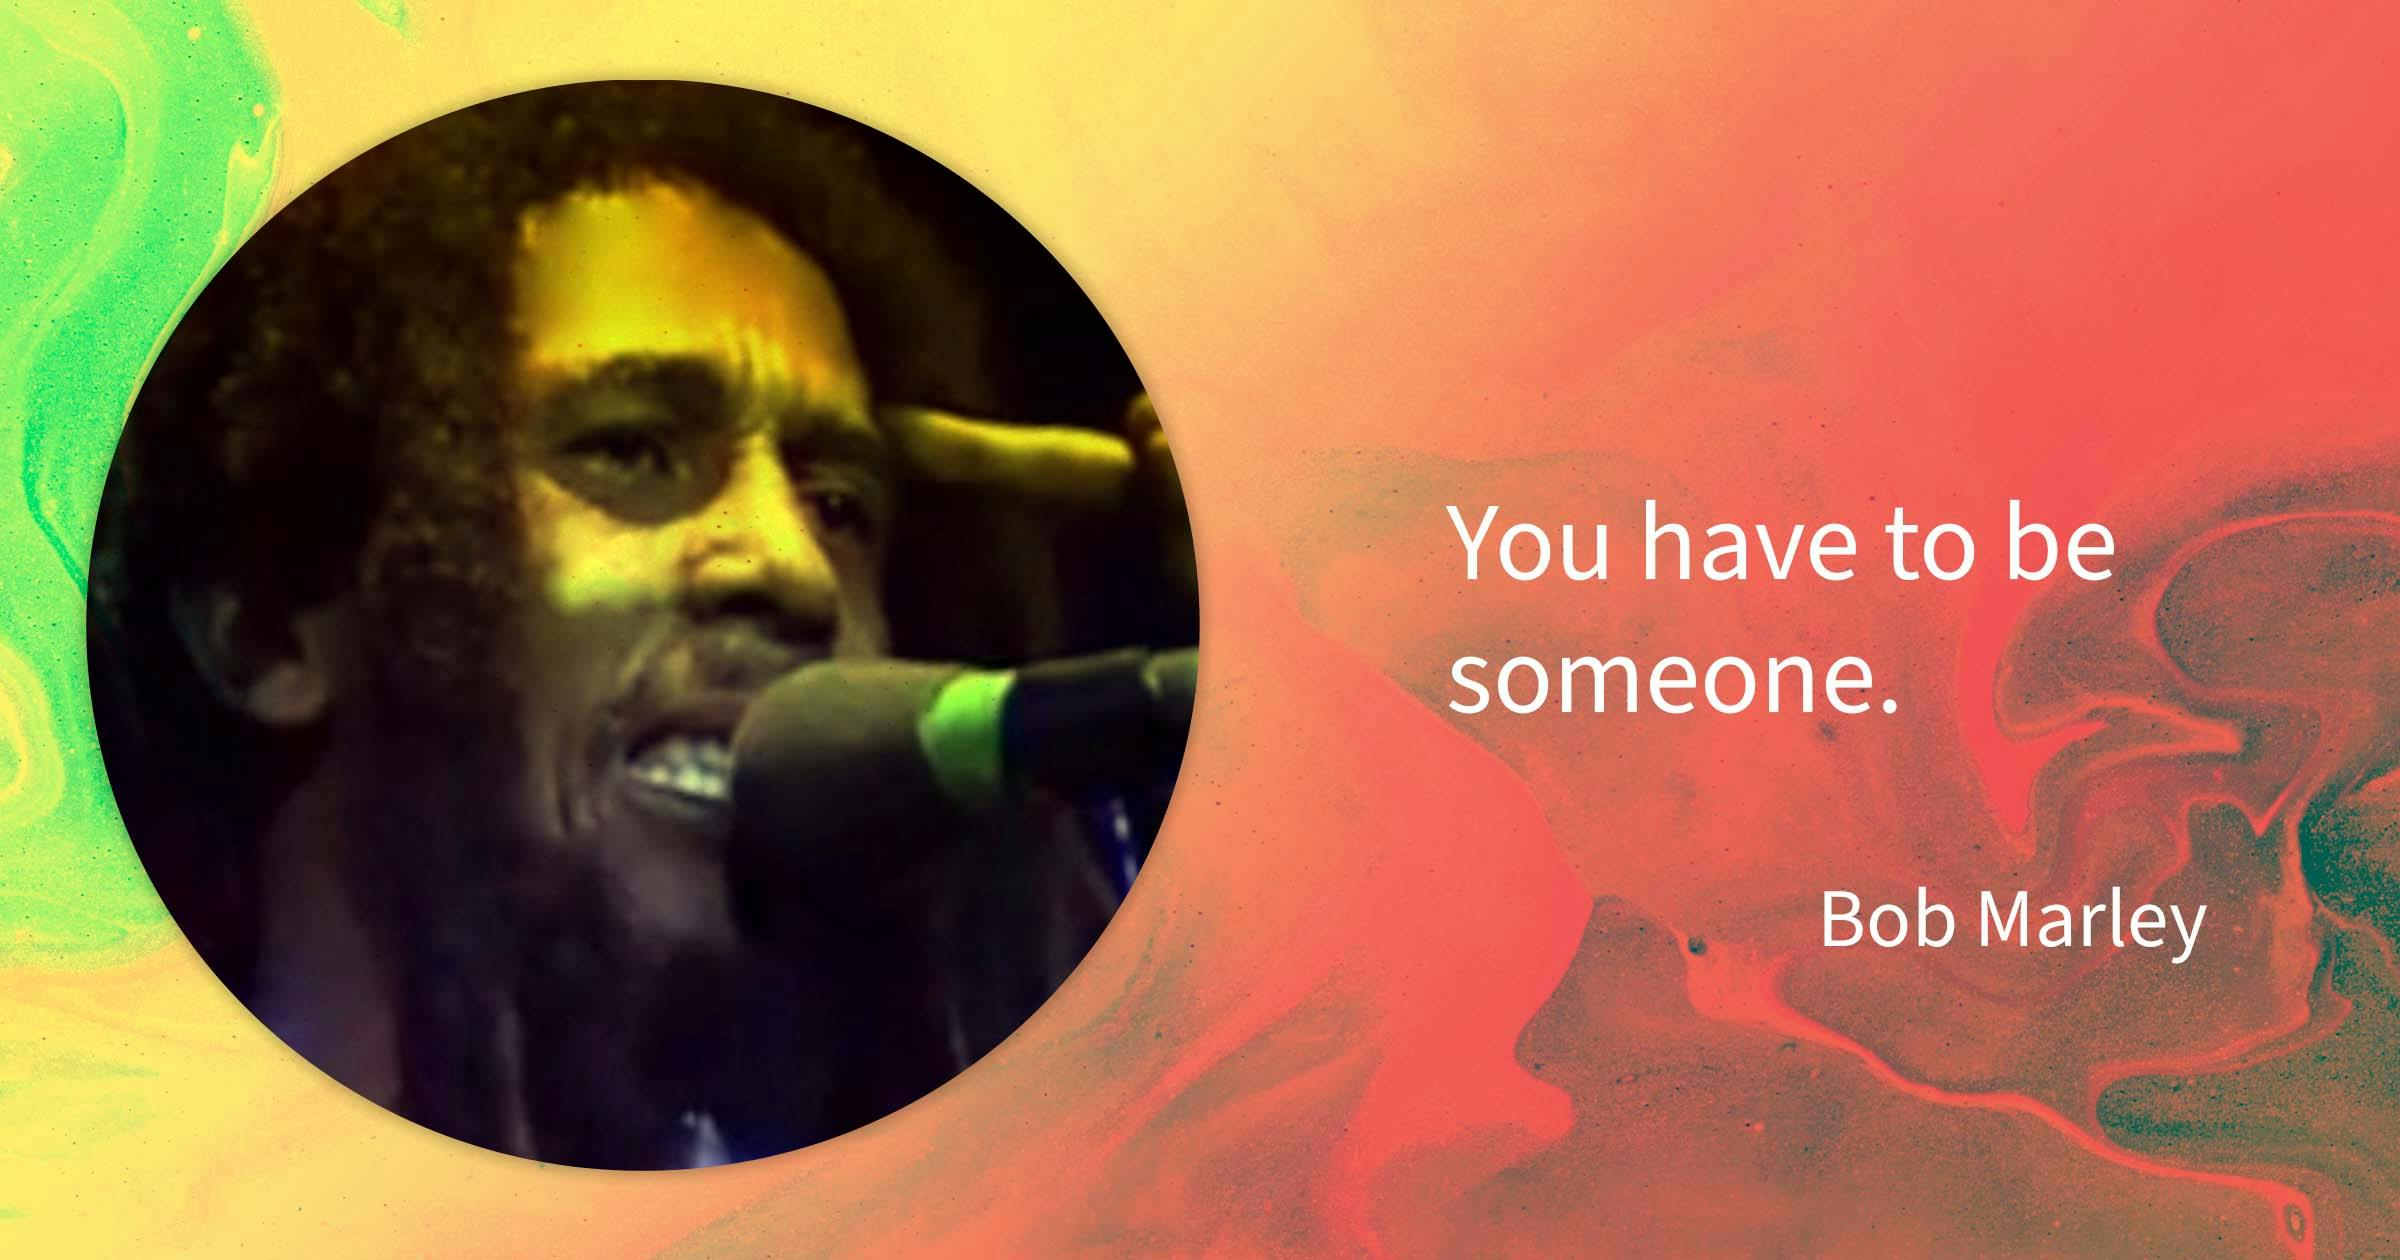 Bob Marley quote: You have to be someone.